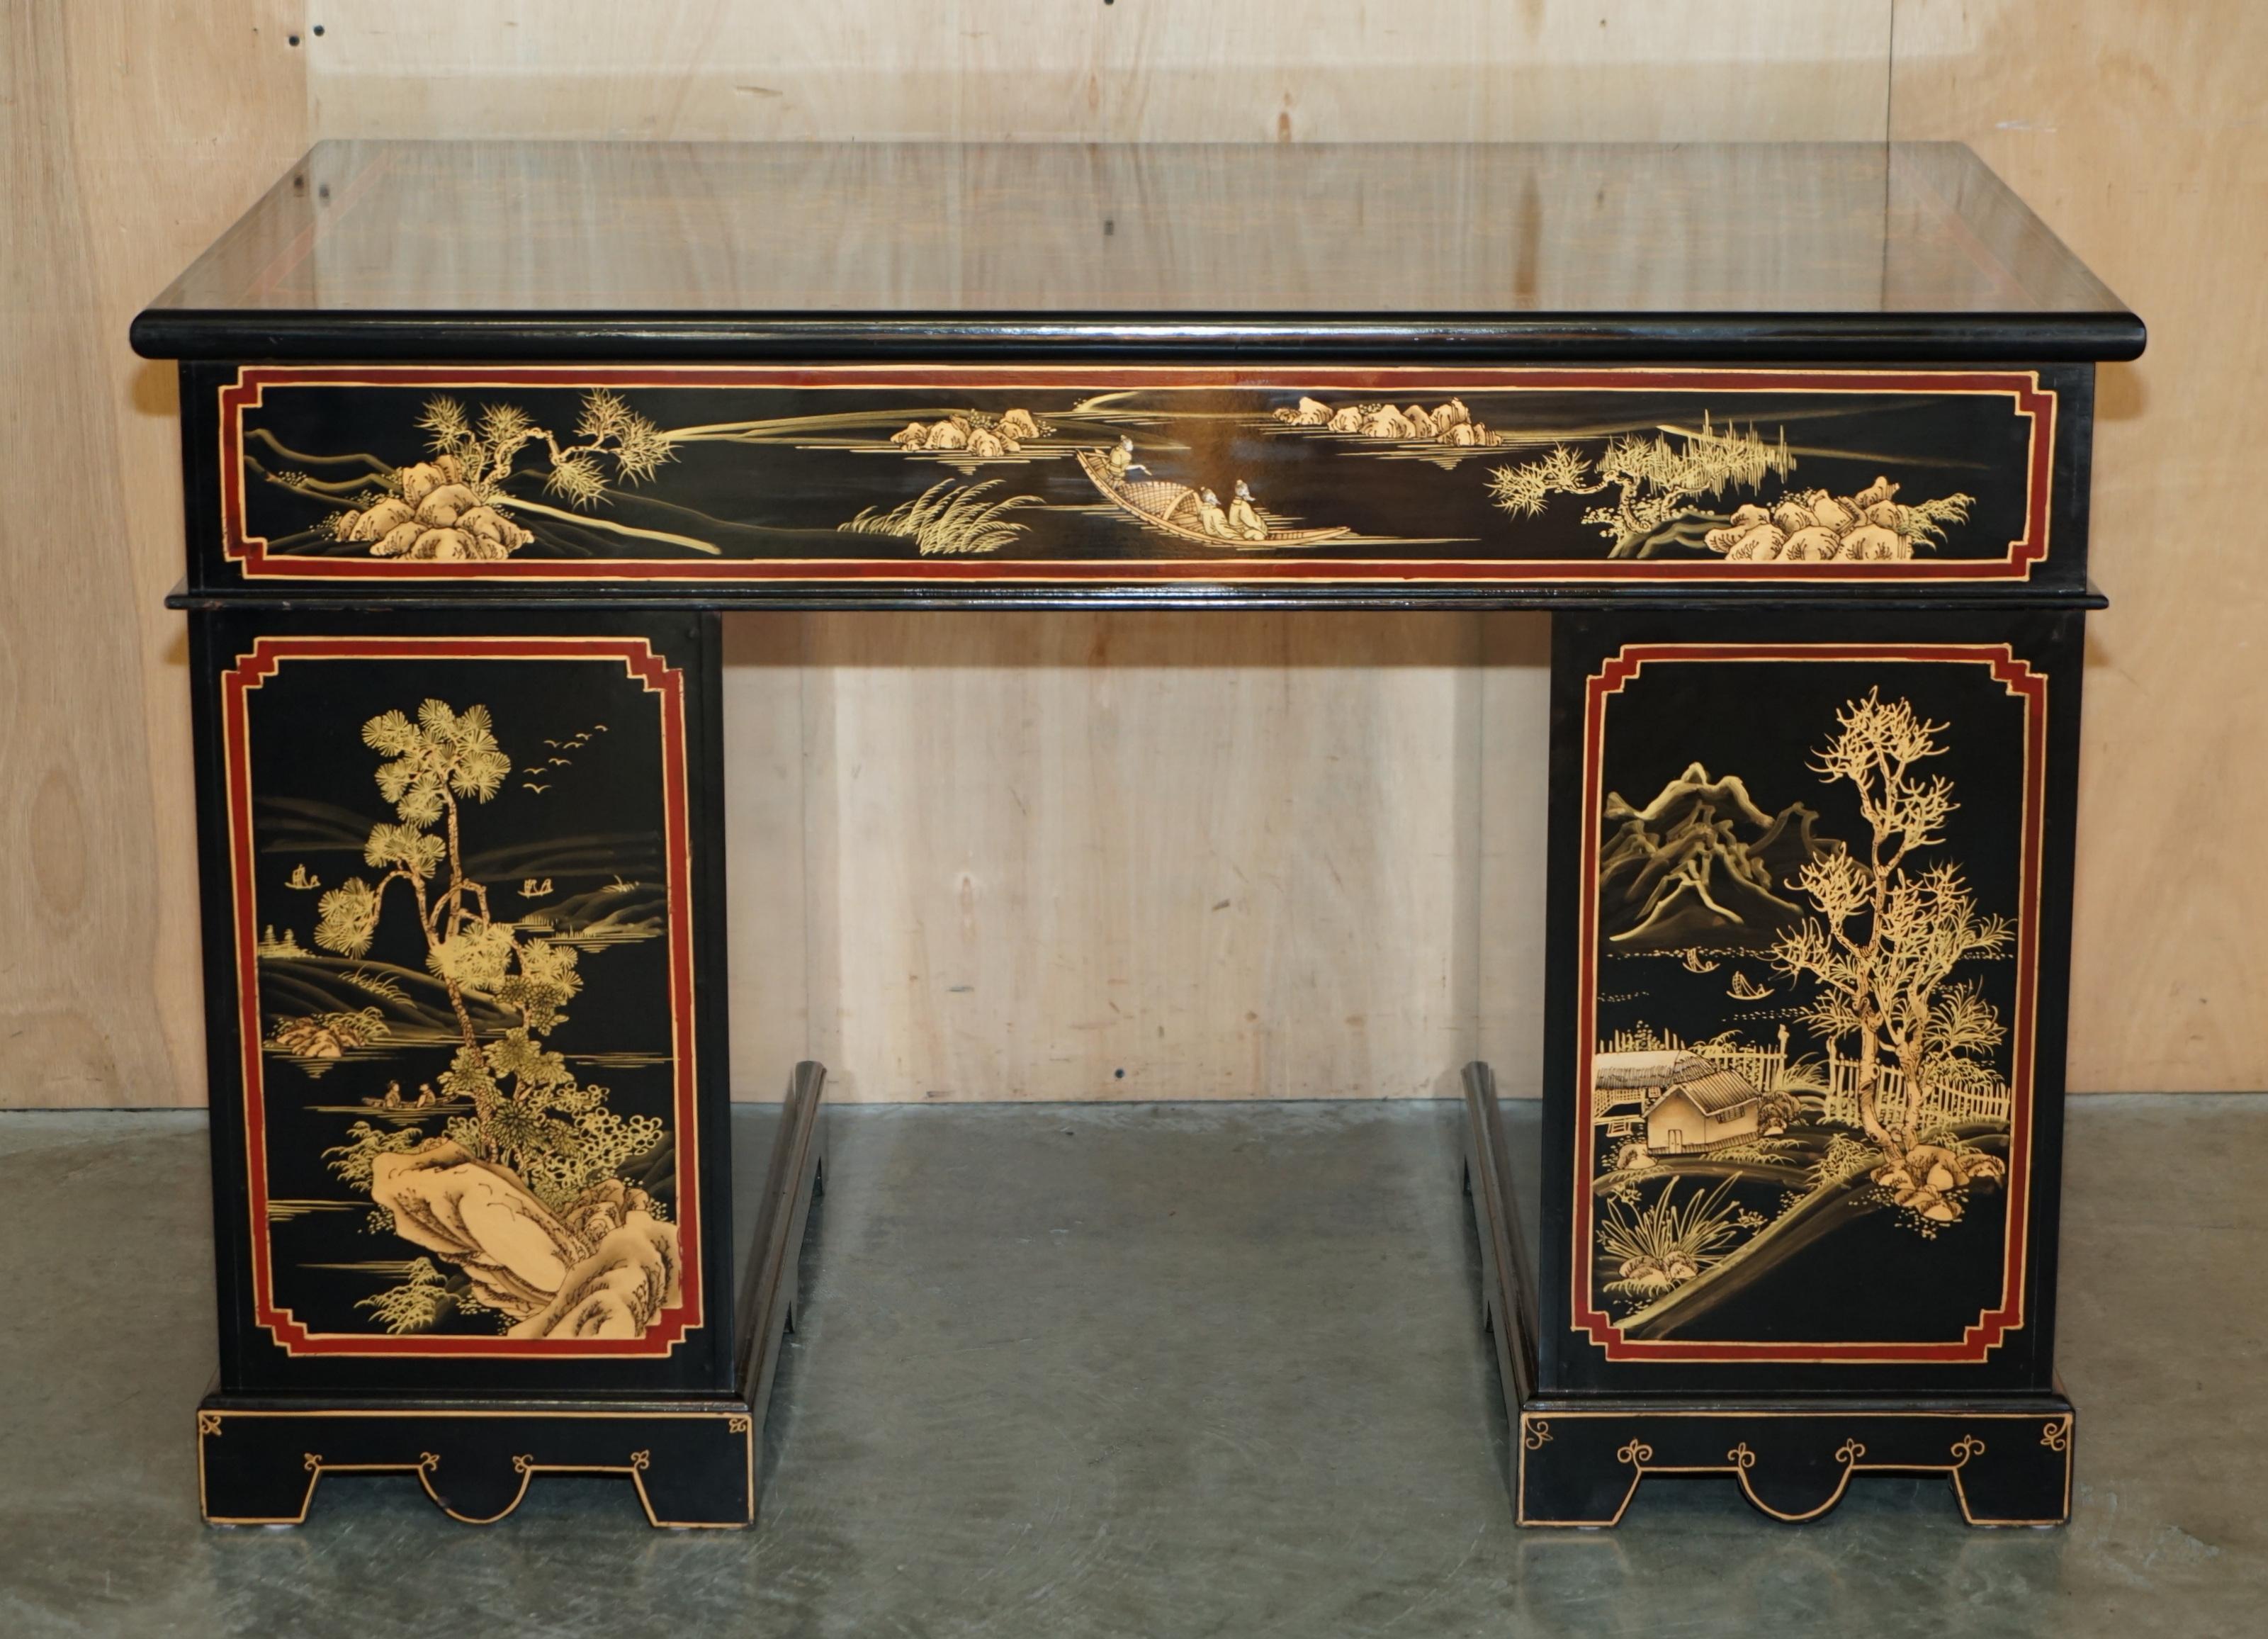 VINTAGE CHiNESE CHINOISERIE DECORATED PAINTED & LACQUERED PEDESTAL DESK & CHAIR For Sale 5